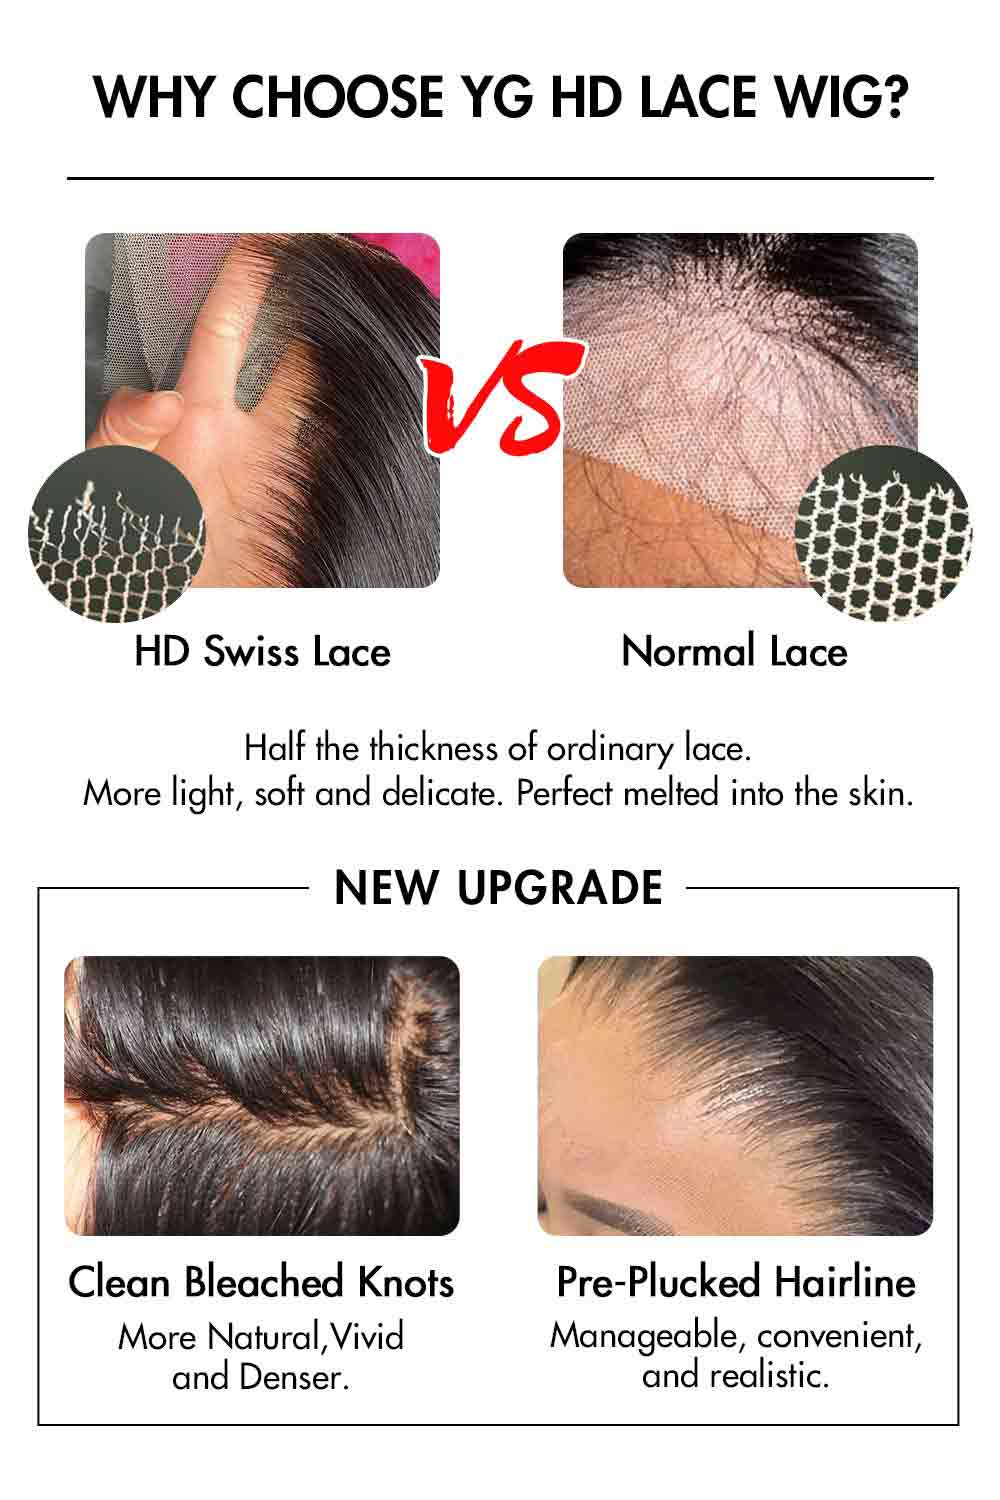 why HD lace wigs?